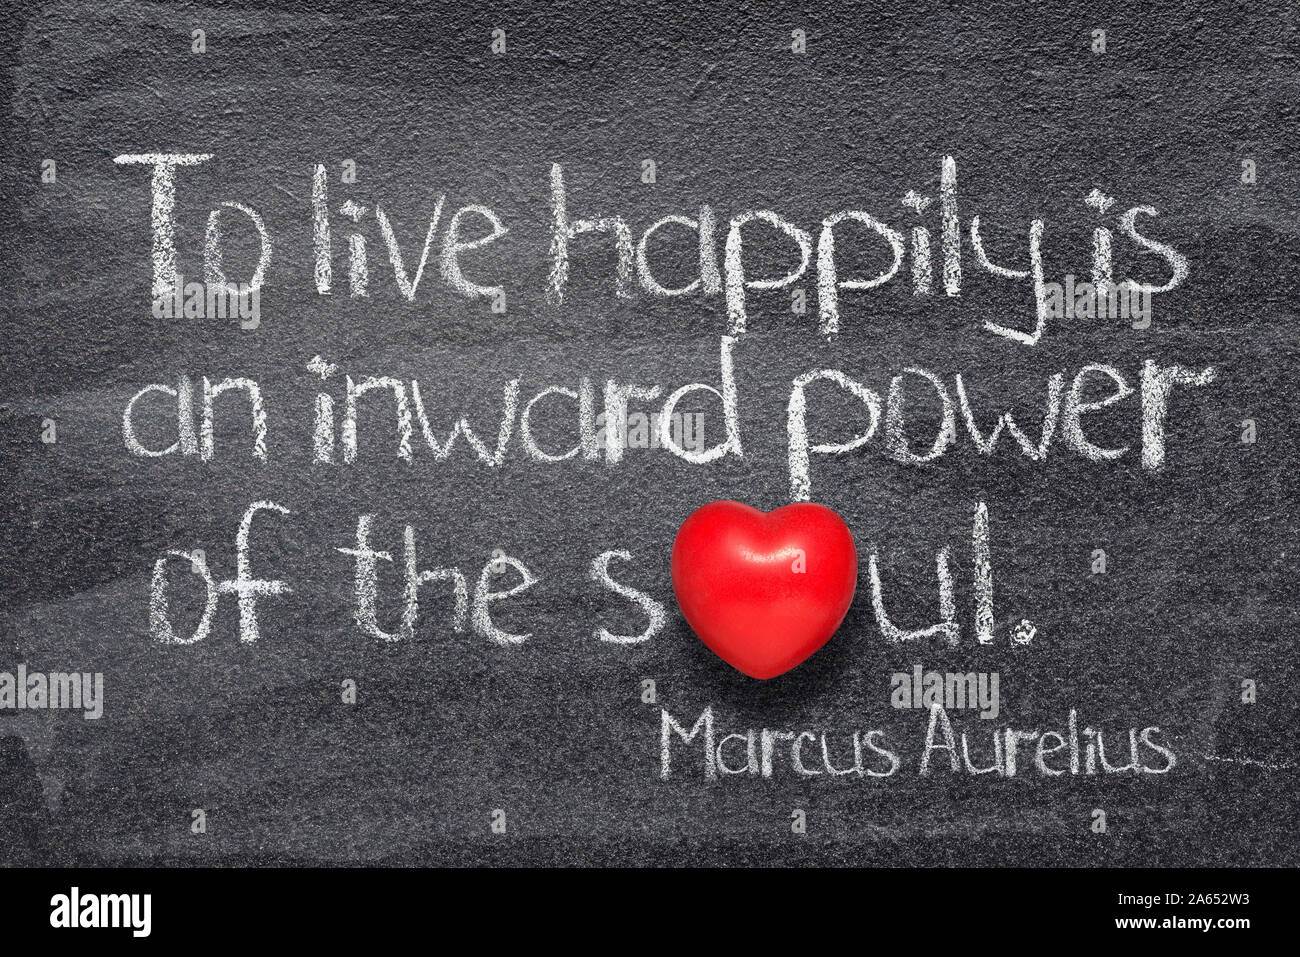 To live happily is an inward power of the soul - ancient Roman philosopher Marcus Aurelius concept quote written on chalkboard Stock Photo